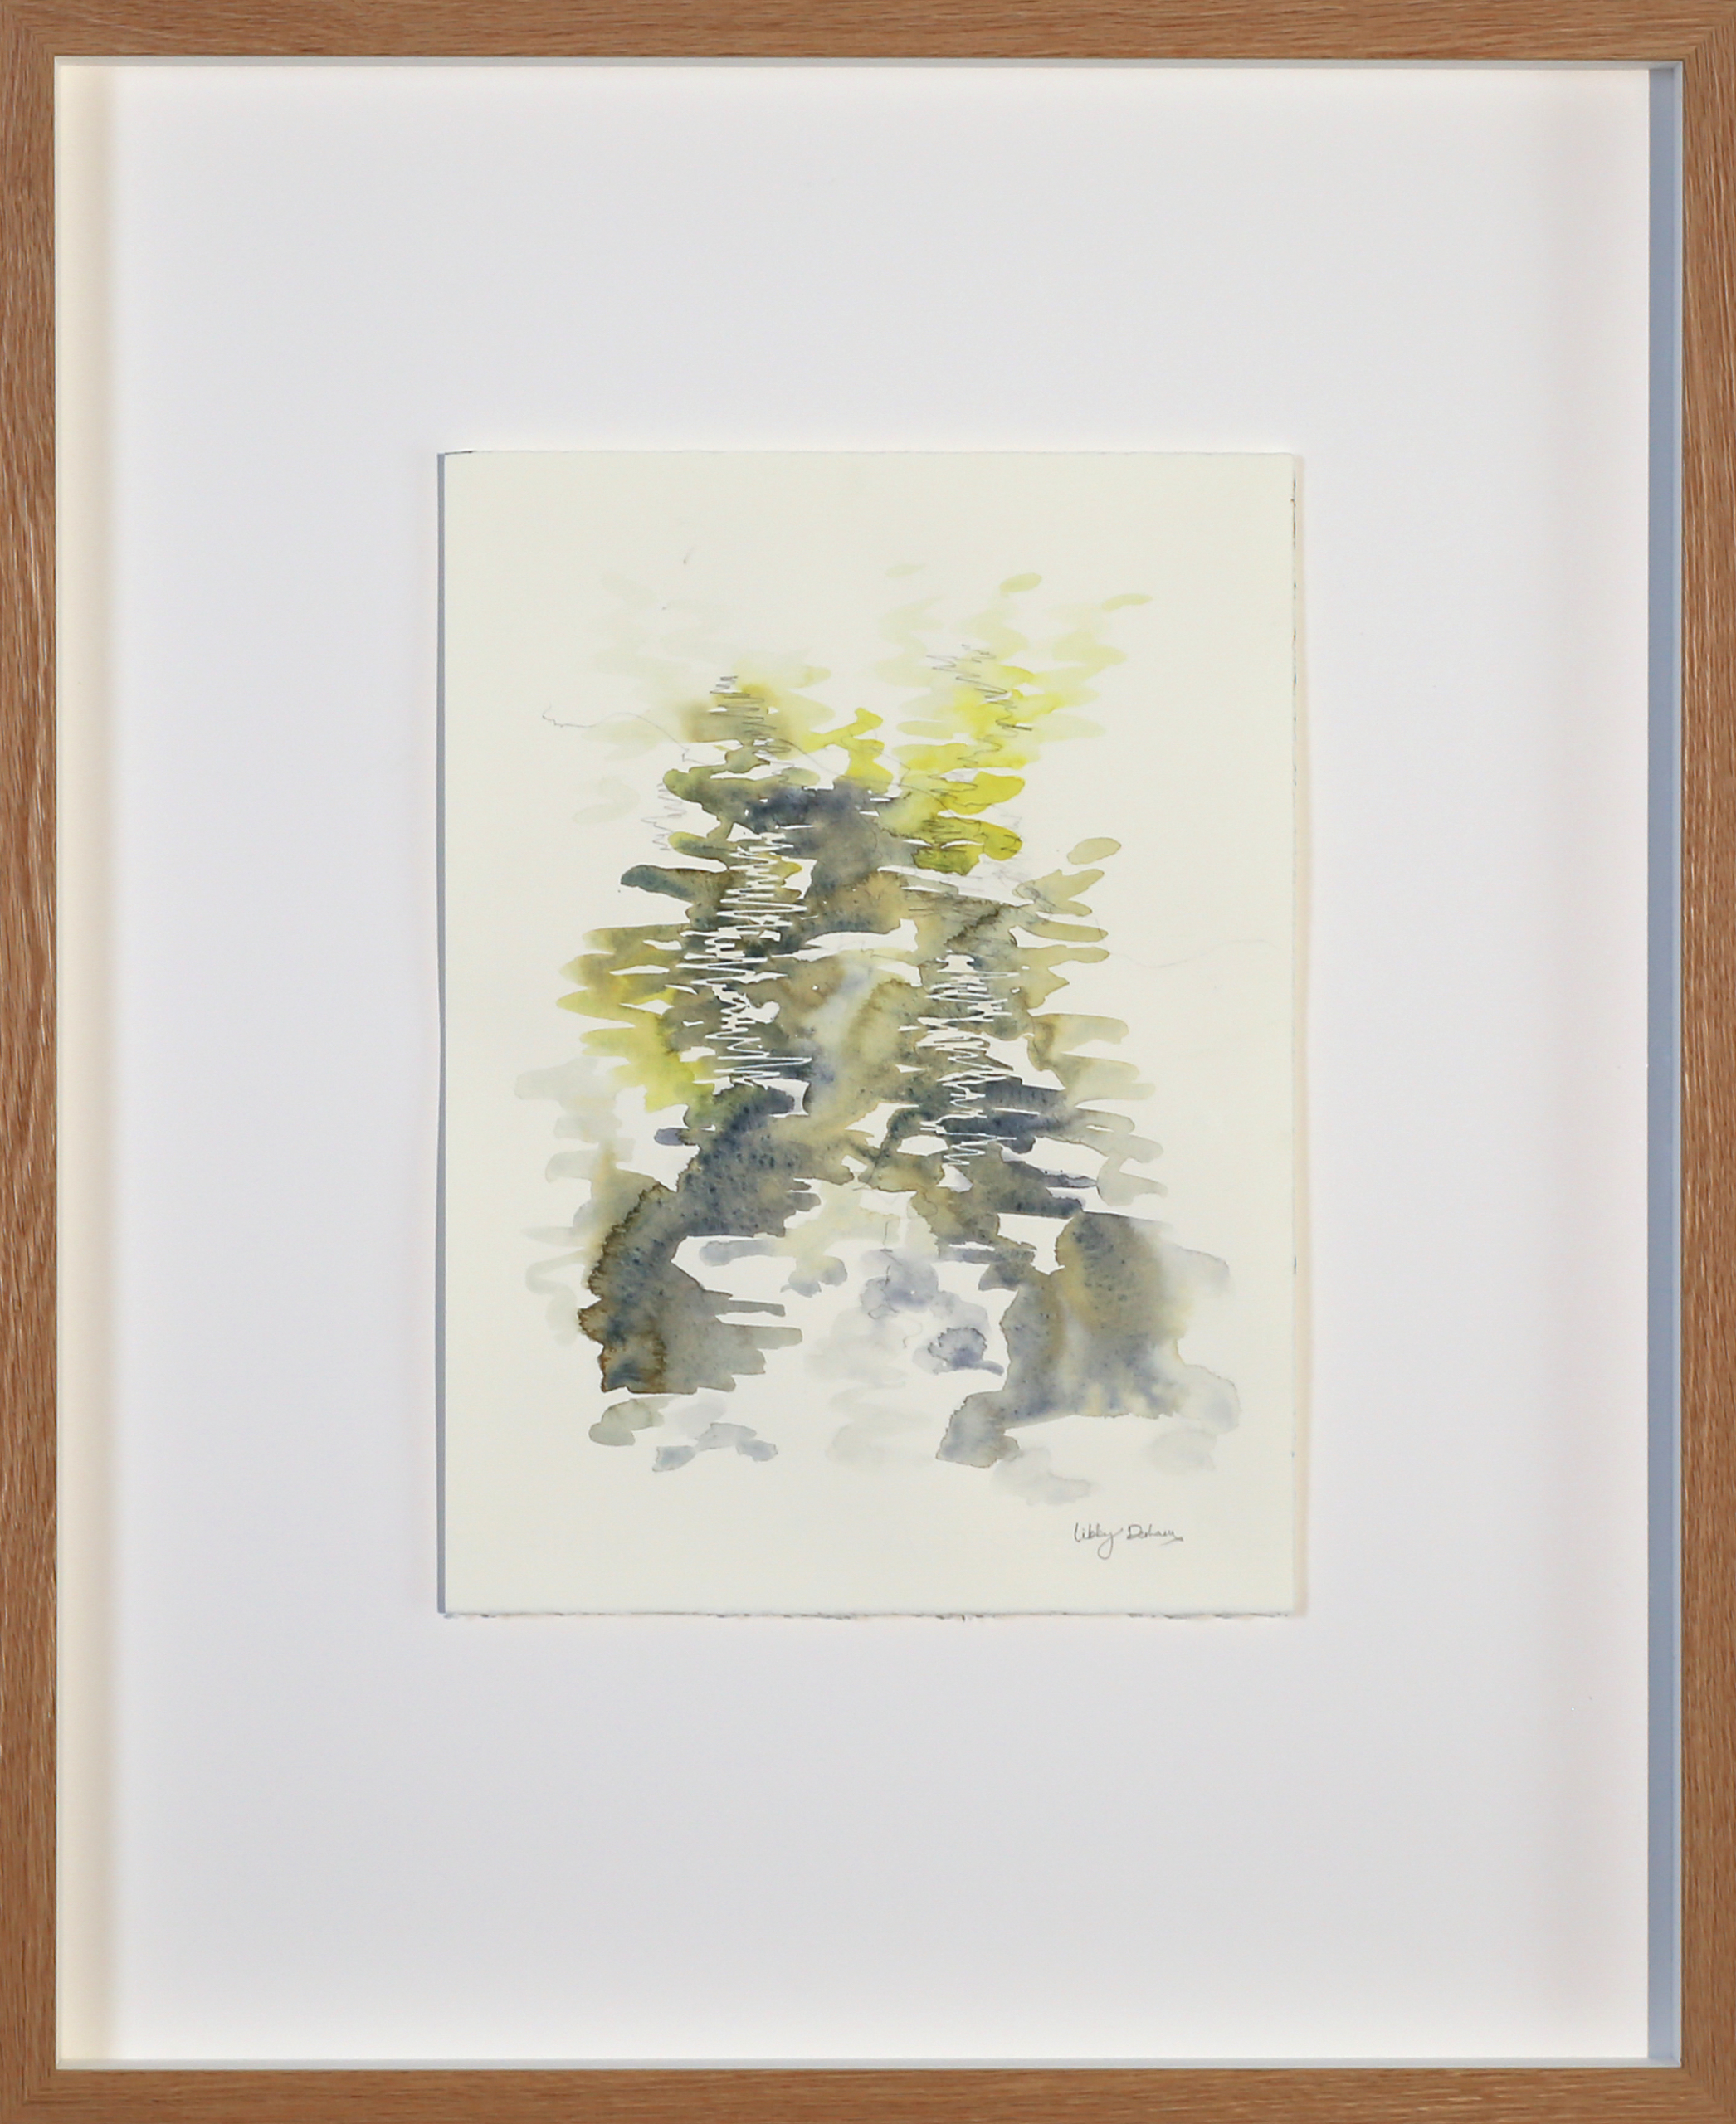 Transcribing Birdsong to Line – Lewins, framed watercolour painting by Libby Derham